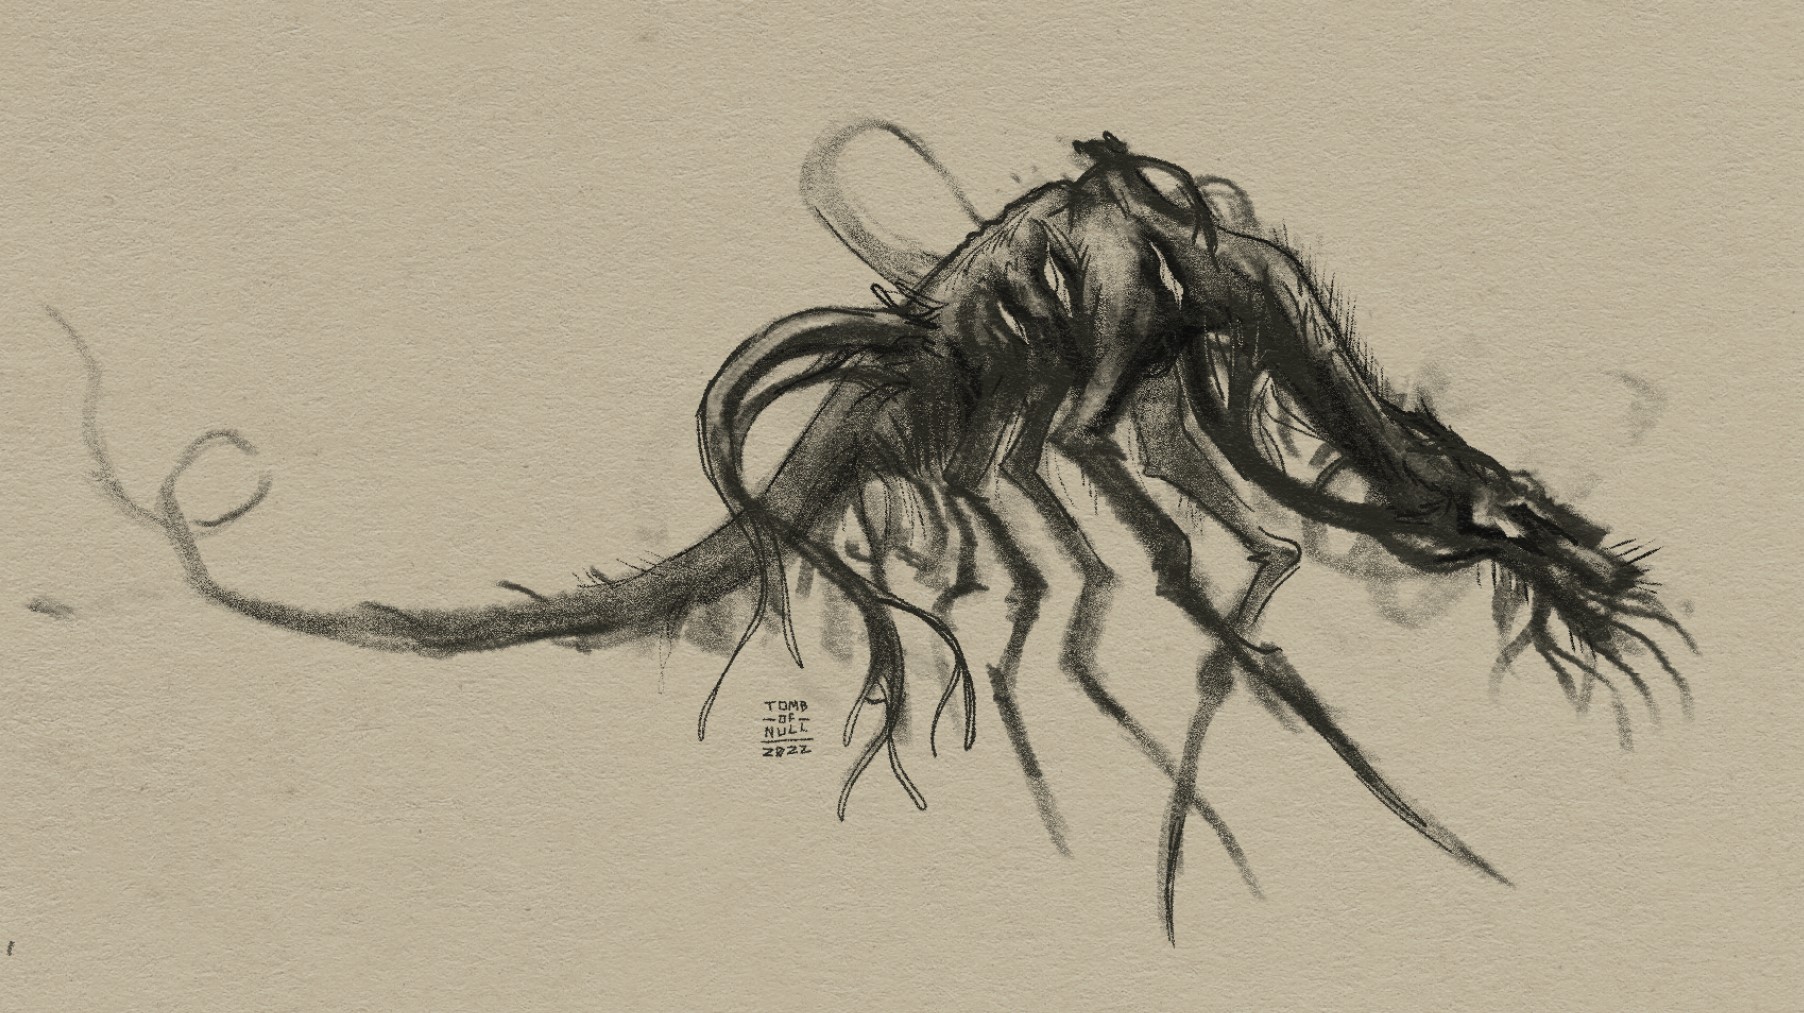 A sketch of a beast with a long body and many limbs. Its head is vaguely shaped like some kind of animal.